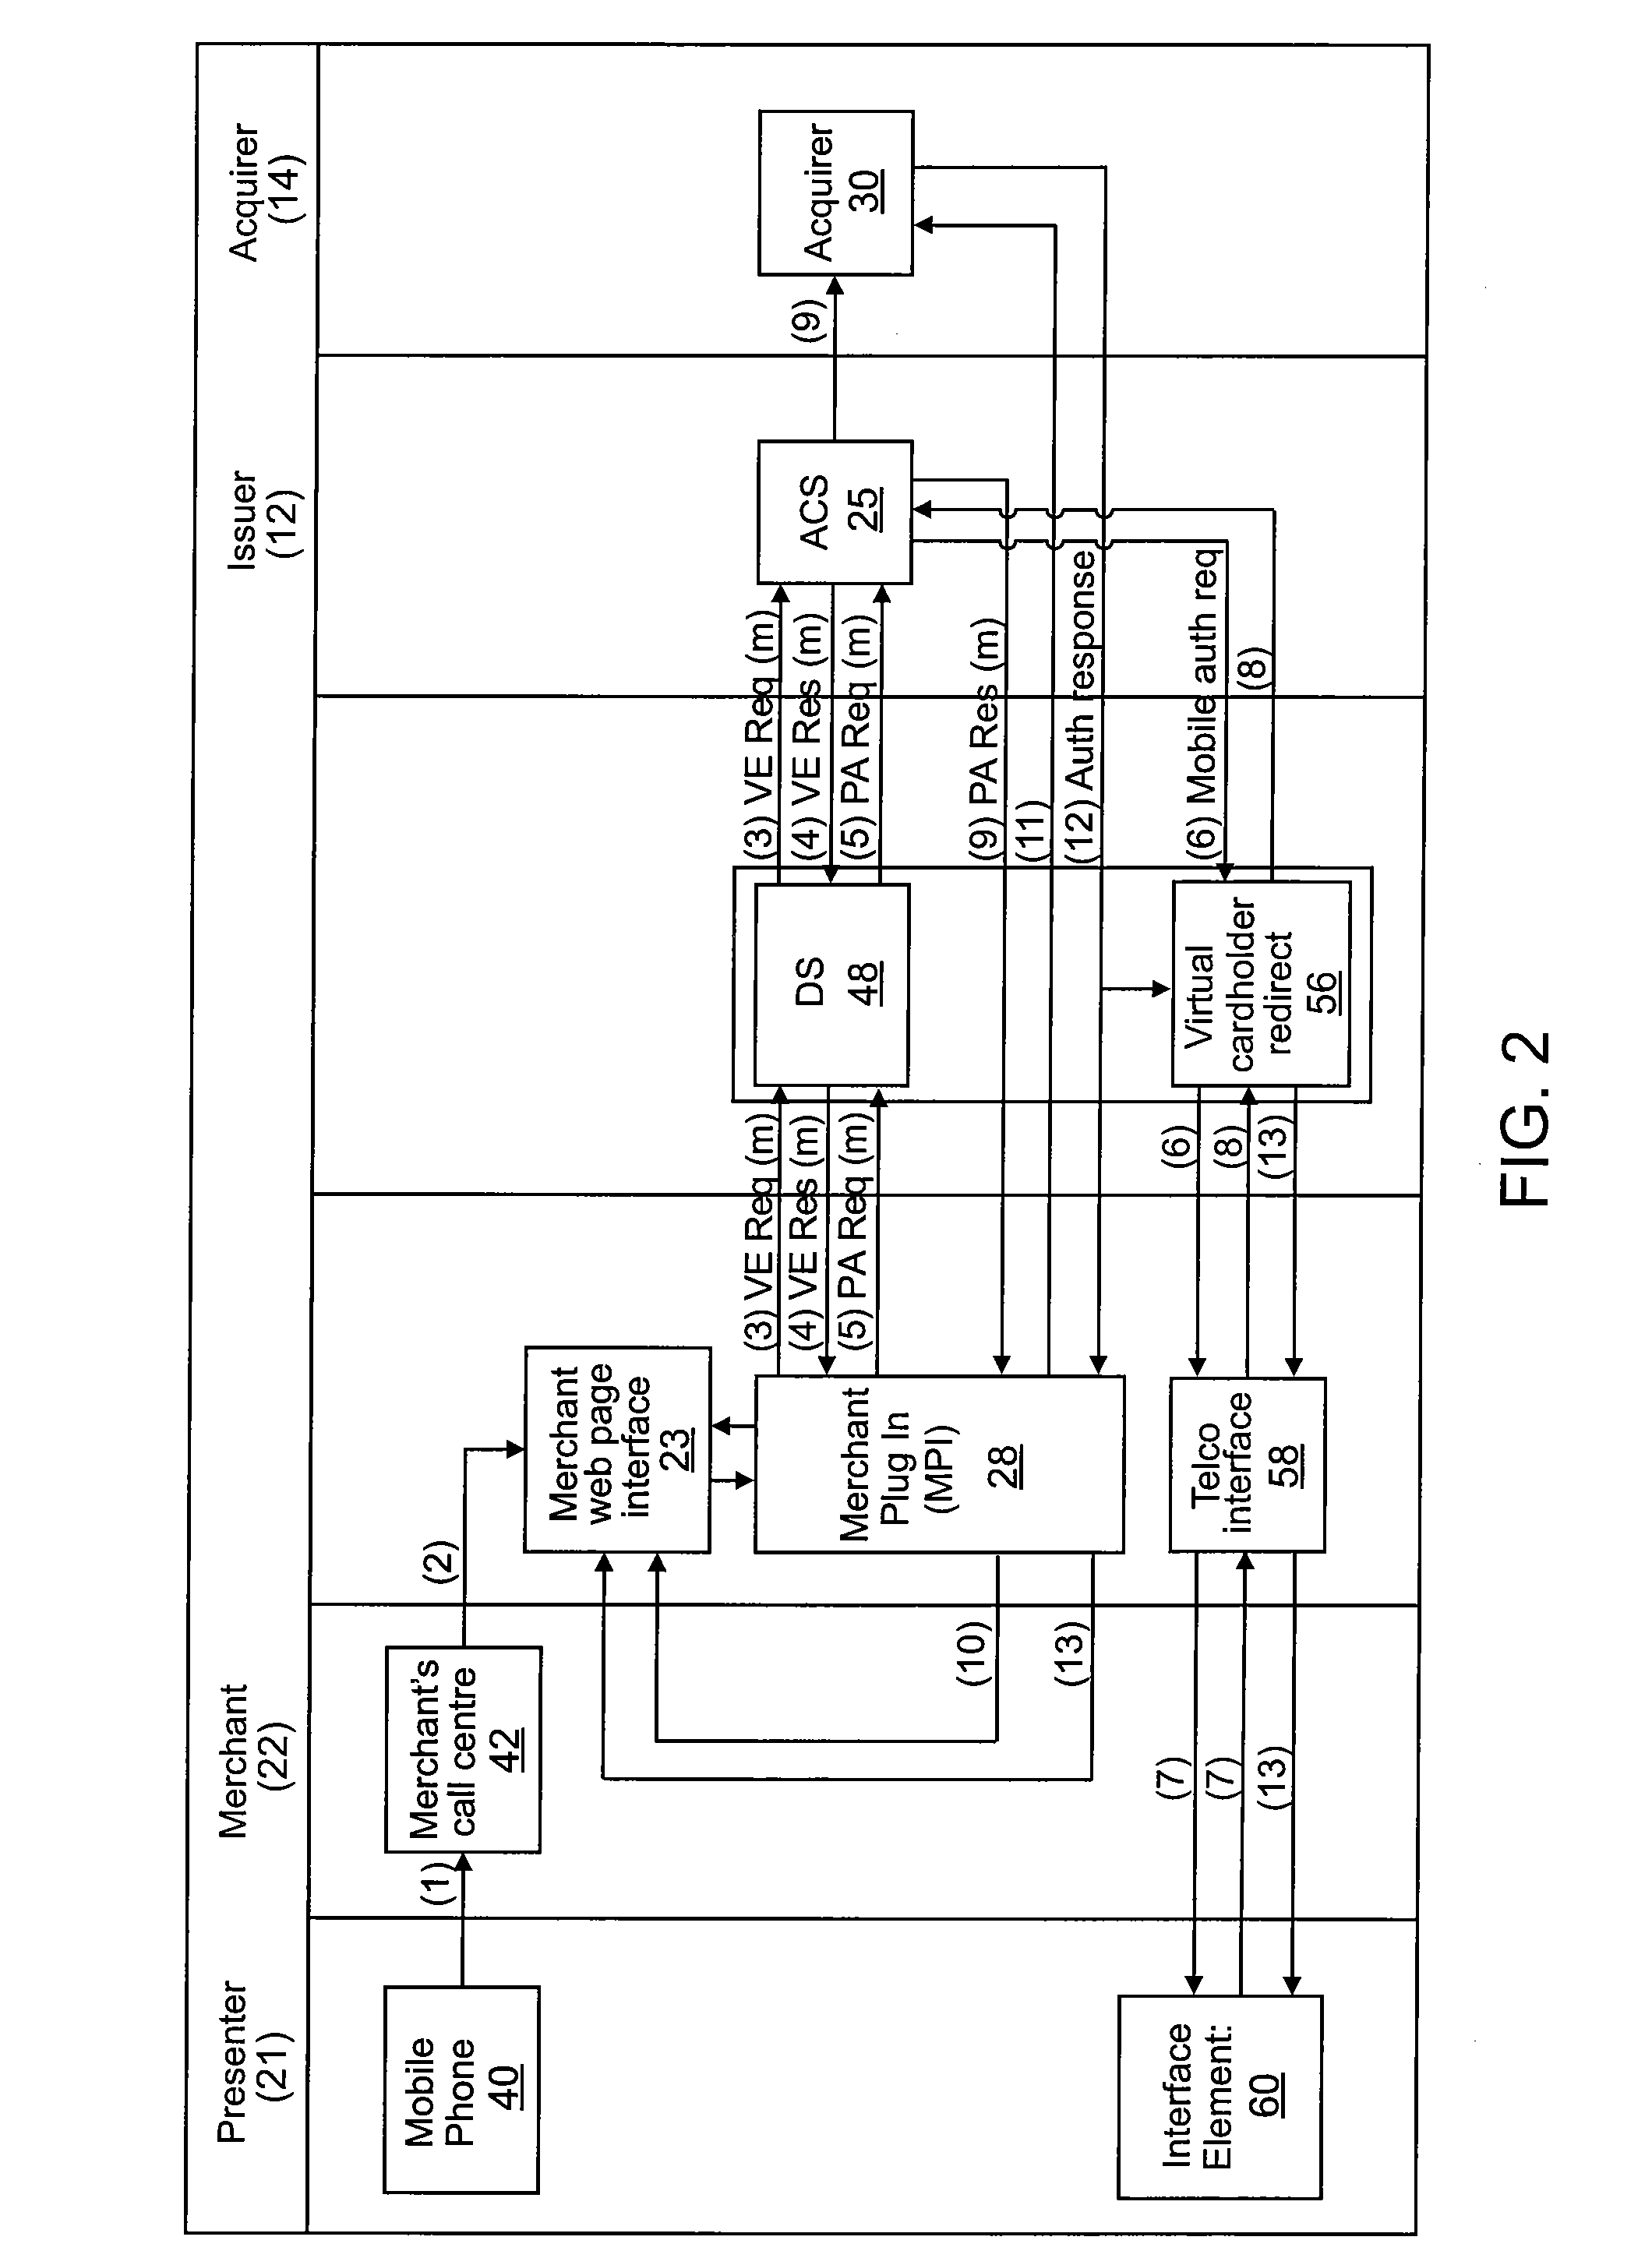 Method and system for authenticating a party to a transaction